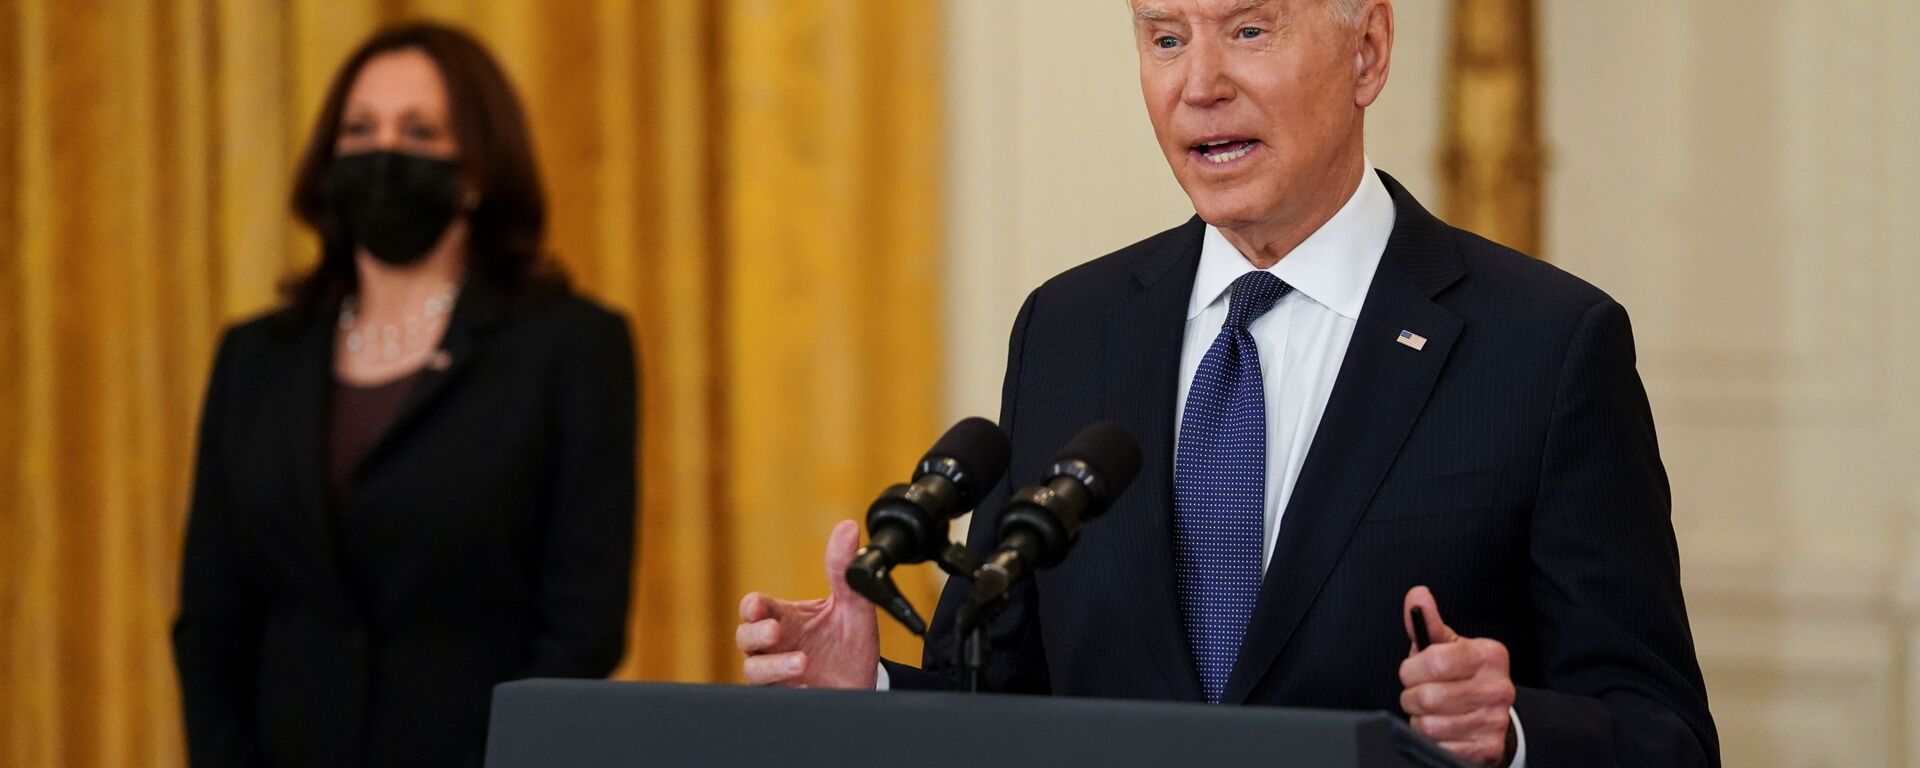 U.S. President Joe Biden delivers remarks on the U.S. economy as Vice President Kamala Harris stands by in the East Room at the White House in Washington, U.S., May 10, 2021 - Sputnik International, 1920, 11.05.2021